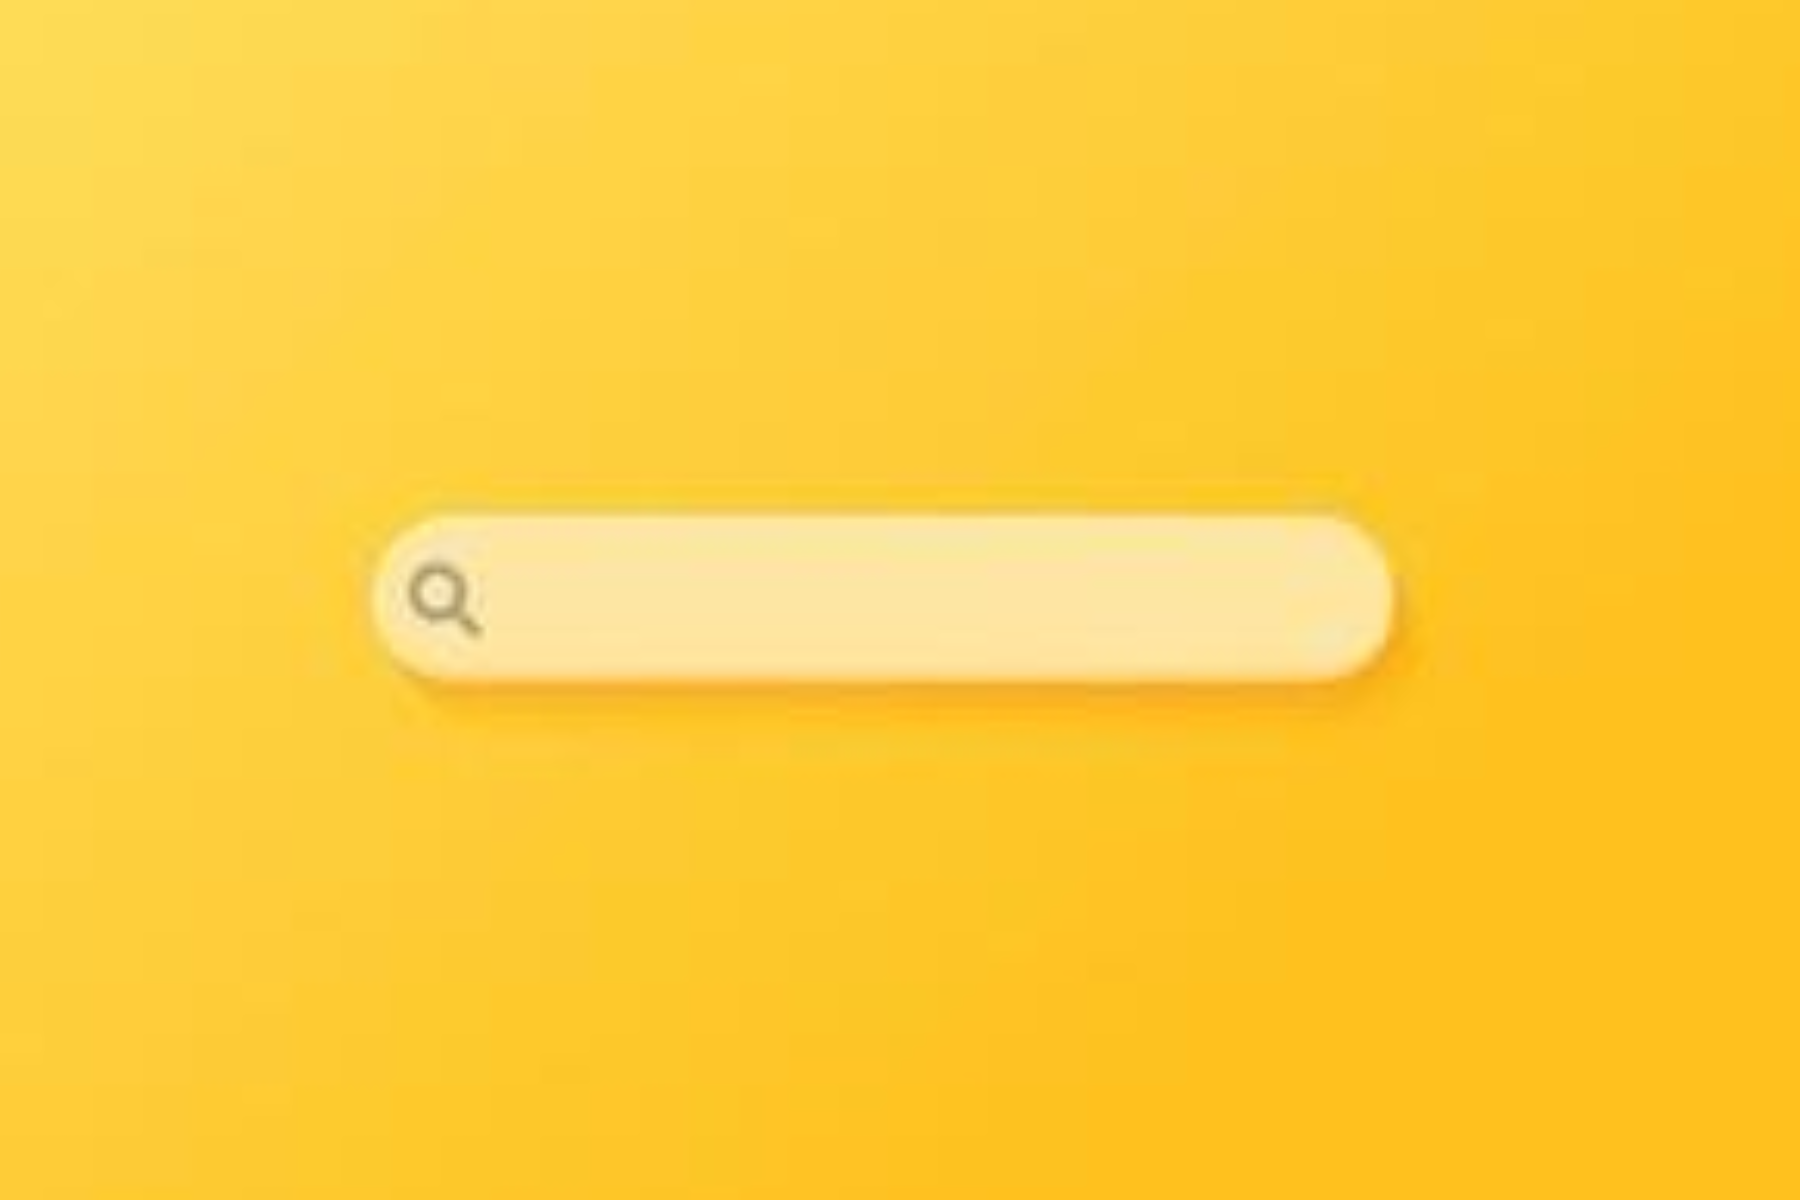 A search bar on a yellow background